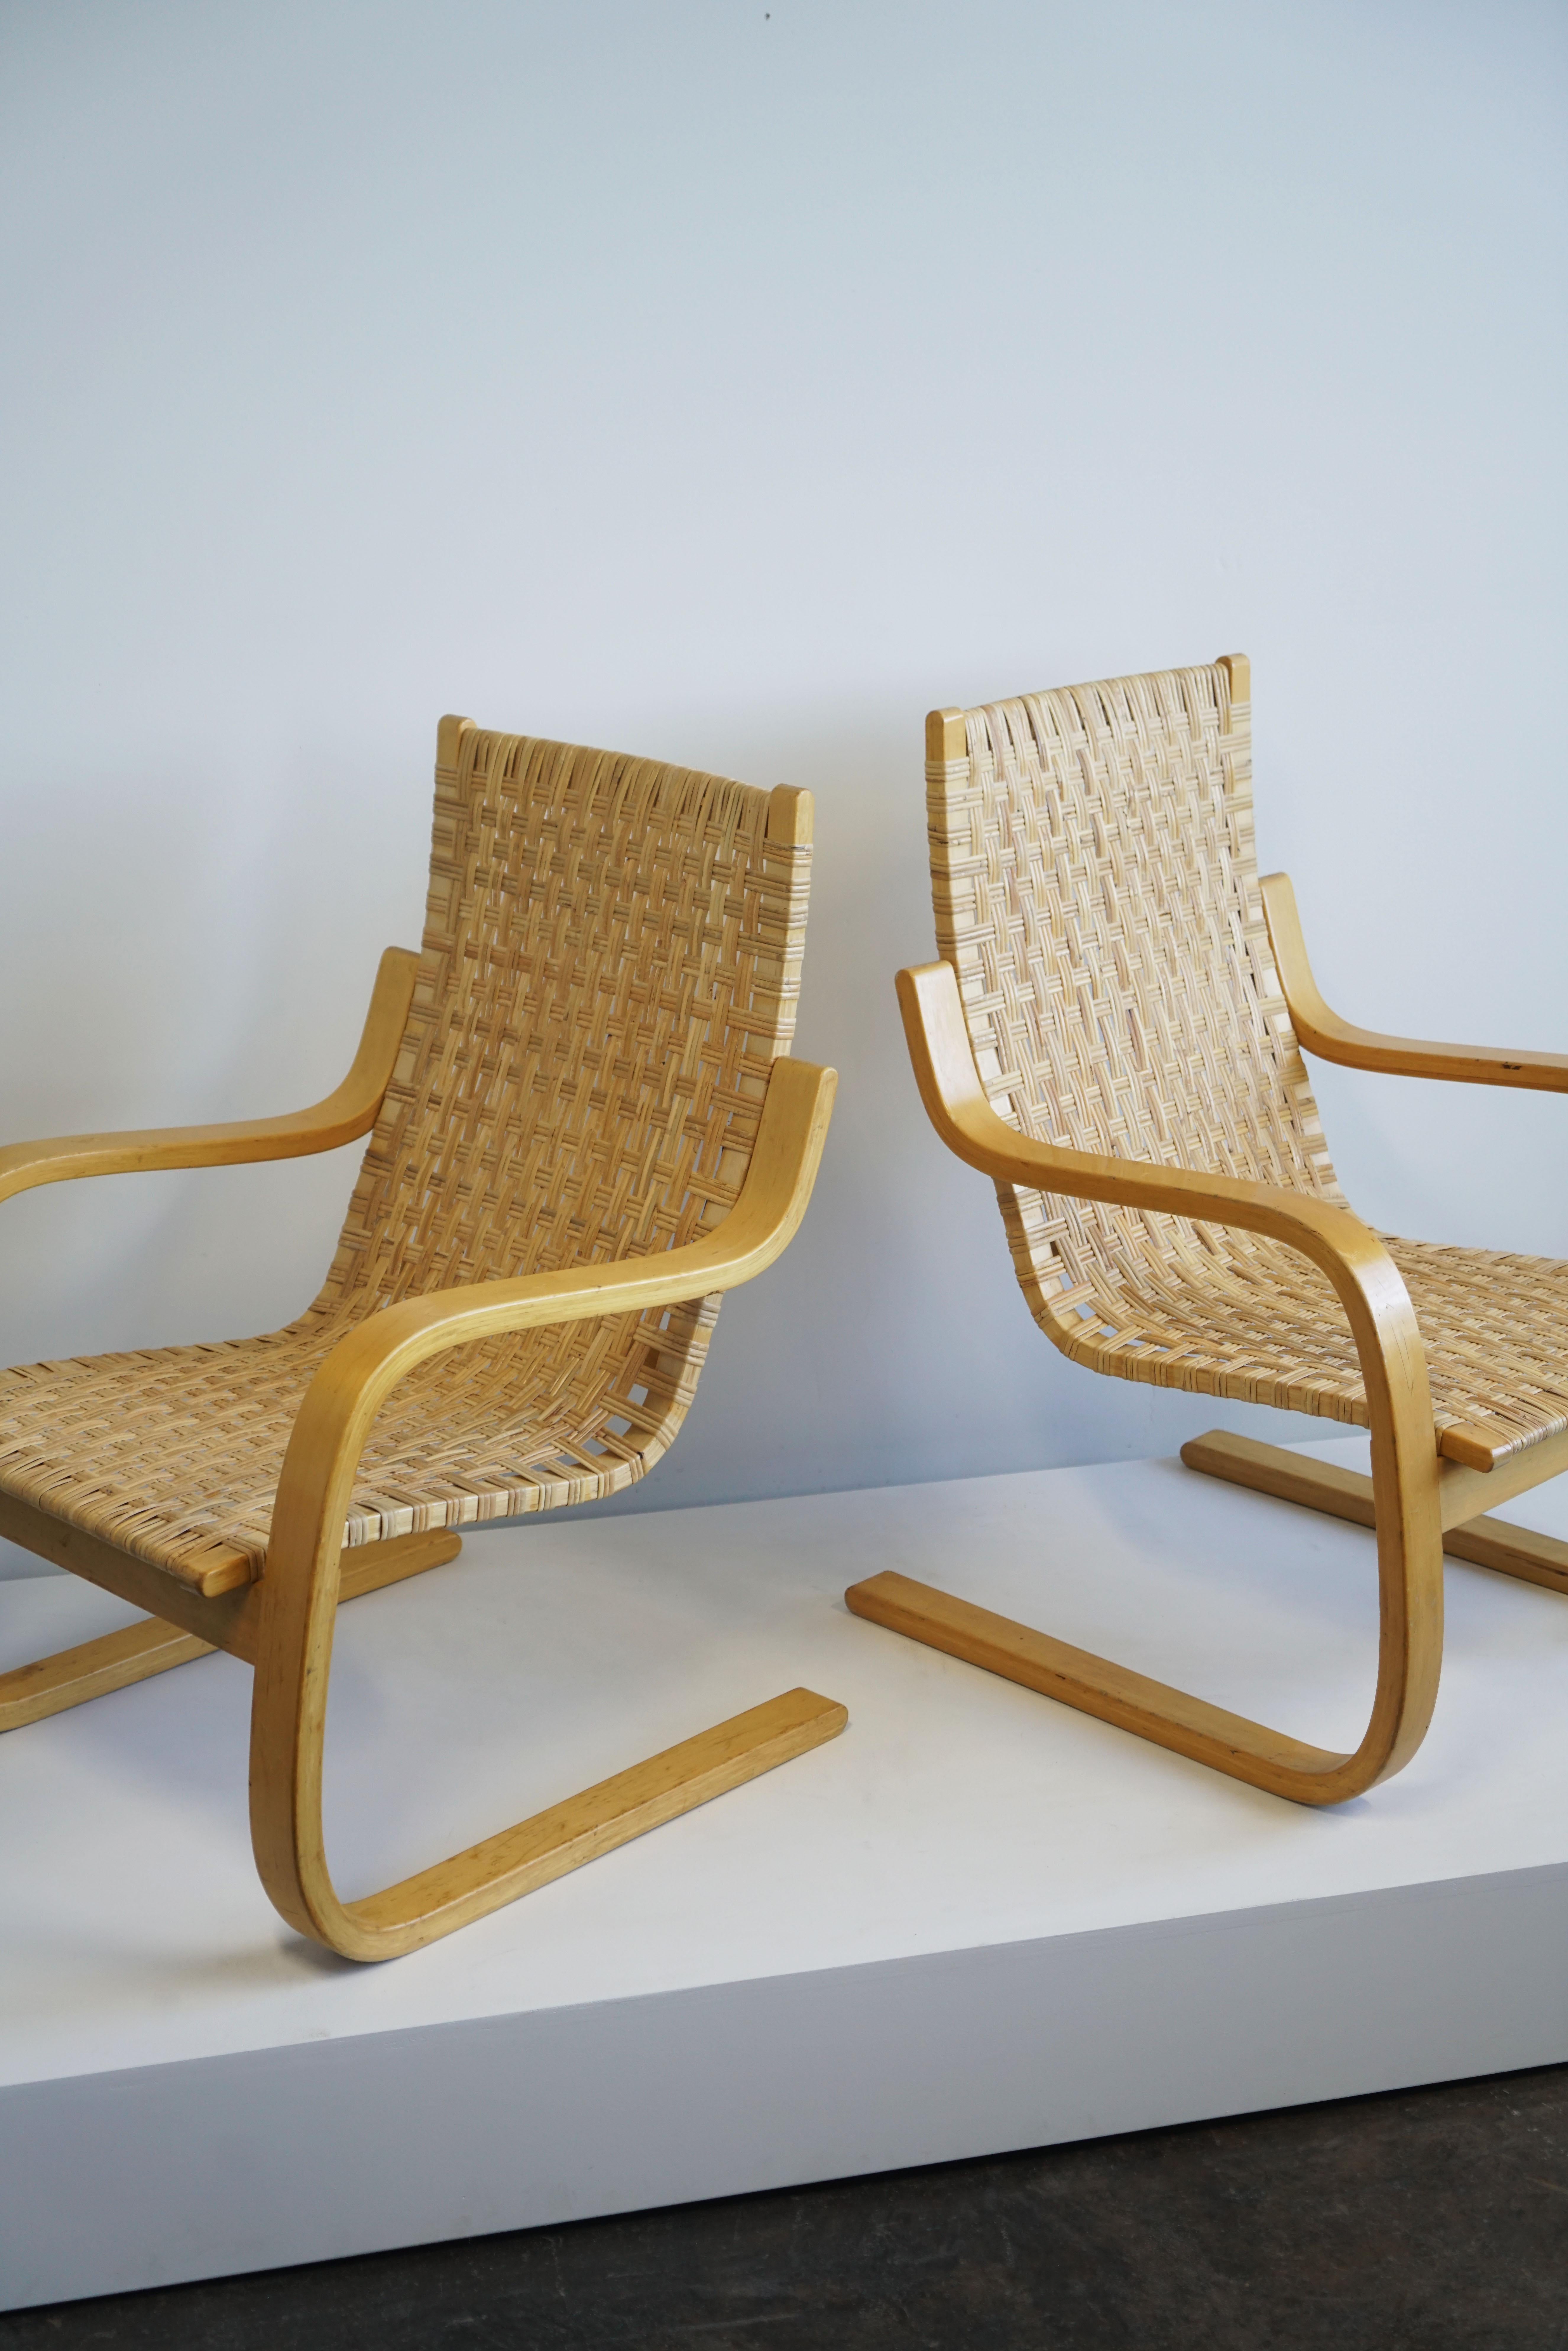 Finnish Pair of Alvar Aalto Cantilever Chairs Model 406 by Artek in Birch Cane Webbing For Sale